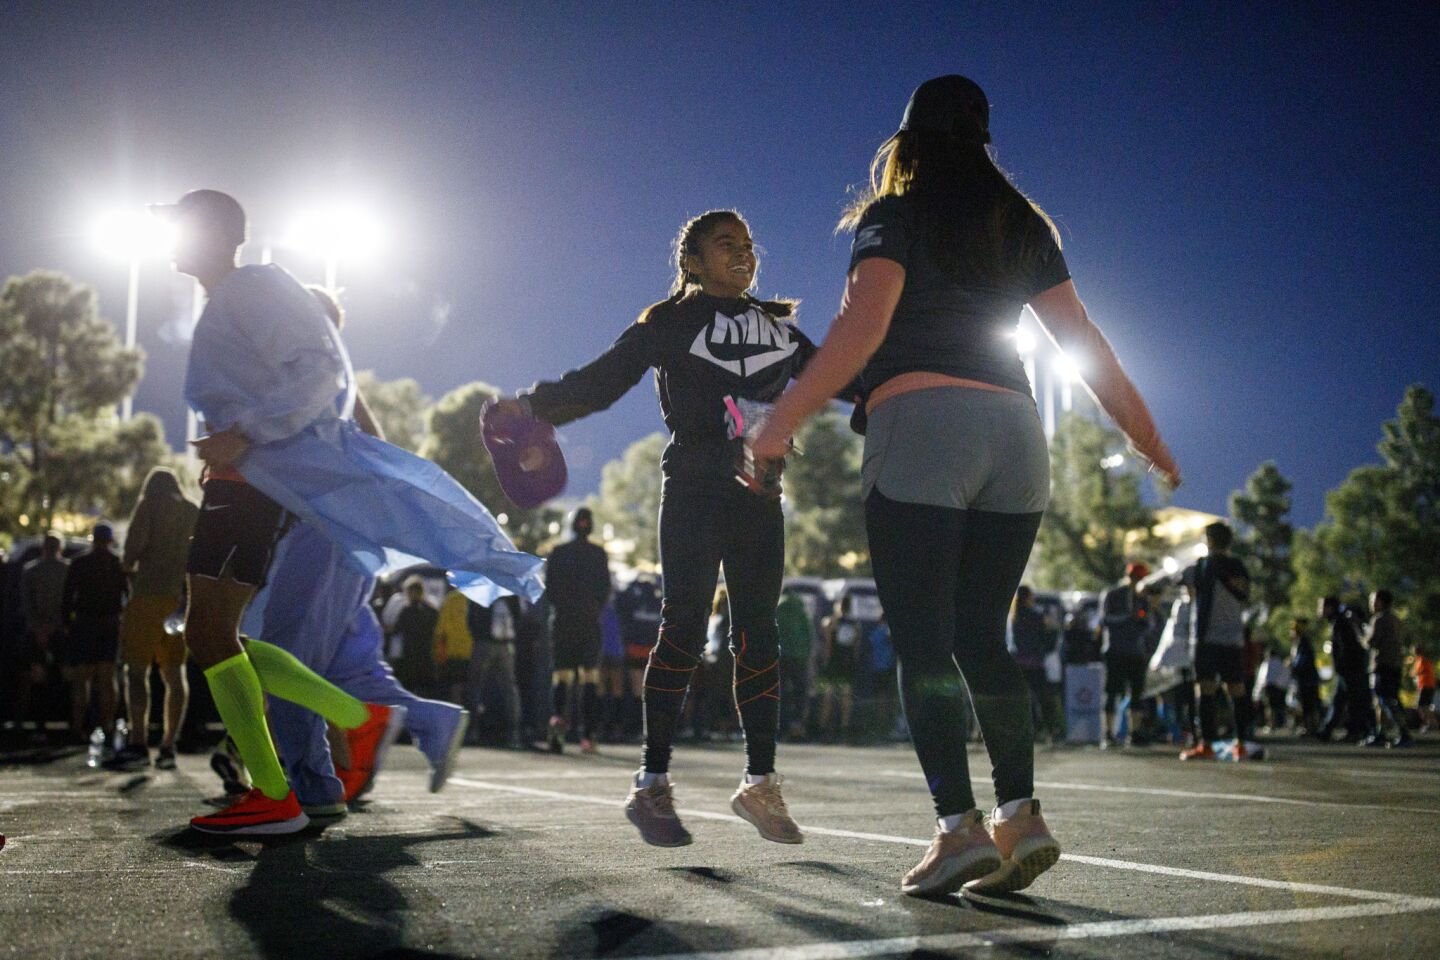 Warming up for the L.A. Marathon, sisters Nelida and Erika Luna do jumping jacks near the start at Dodger Stadium on March 18.